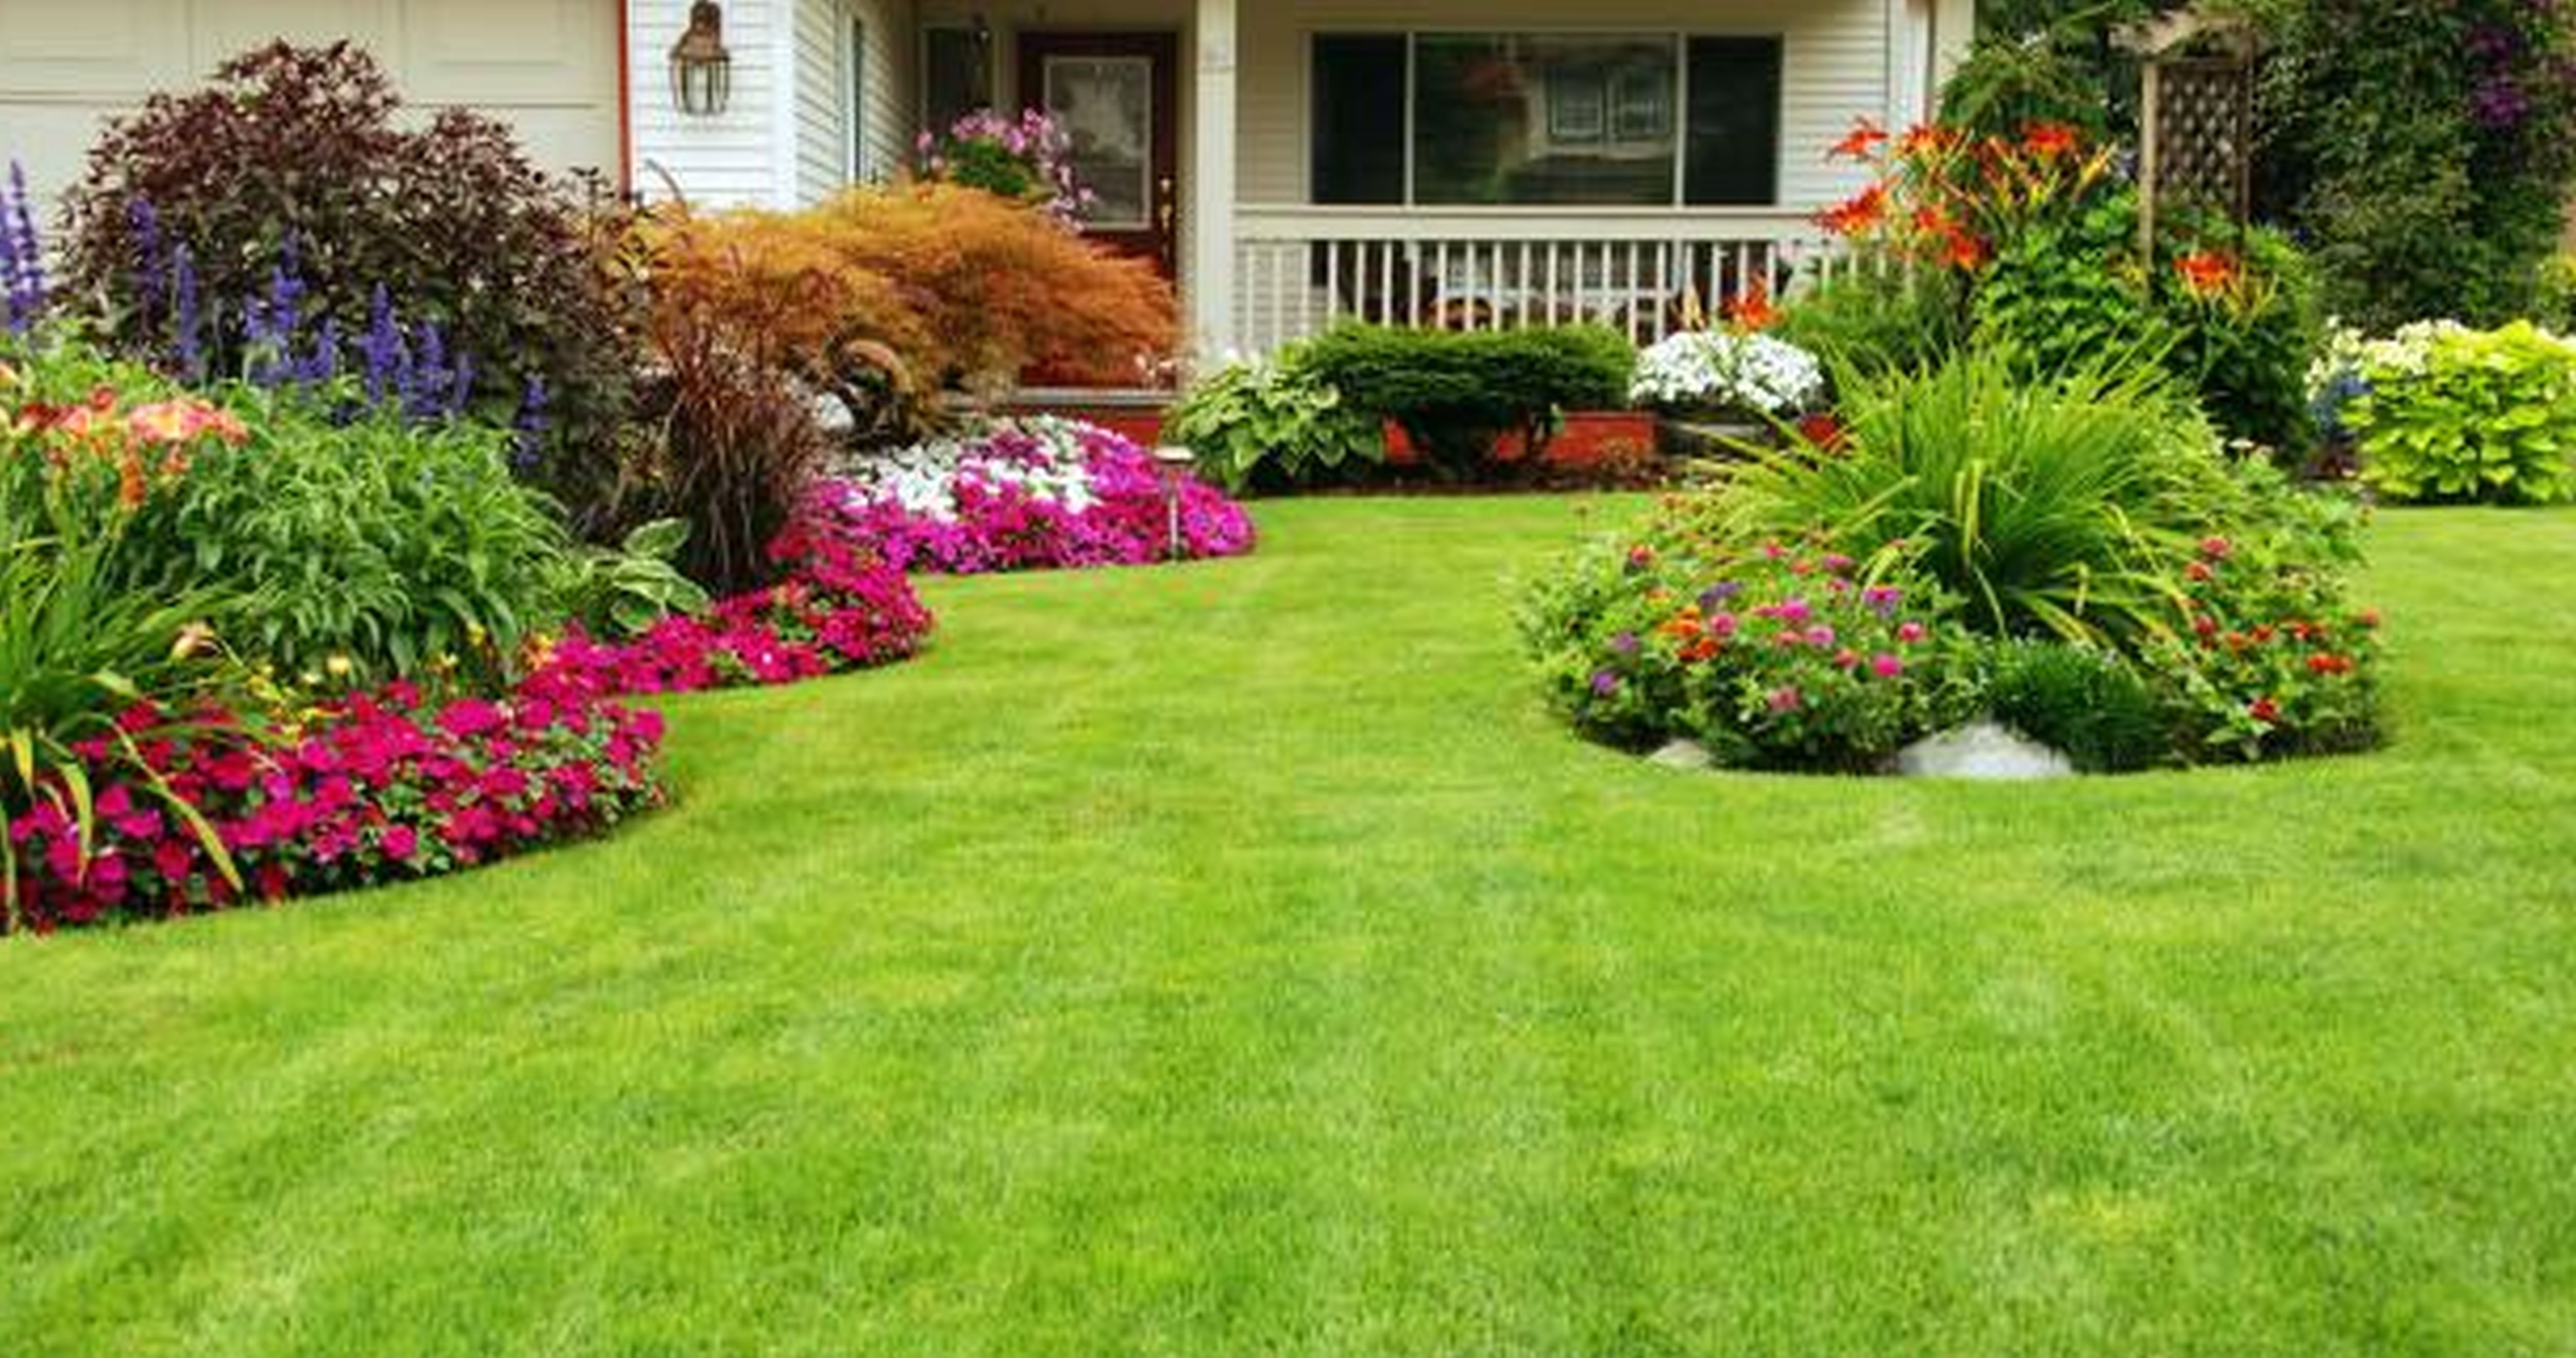 How to have a Beautiful Lawn Garden? - FortunerHome